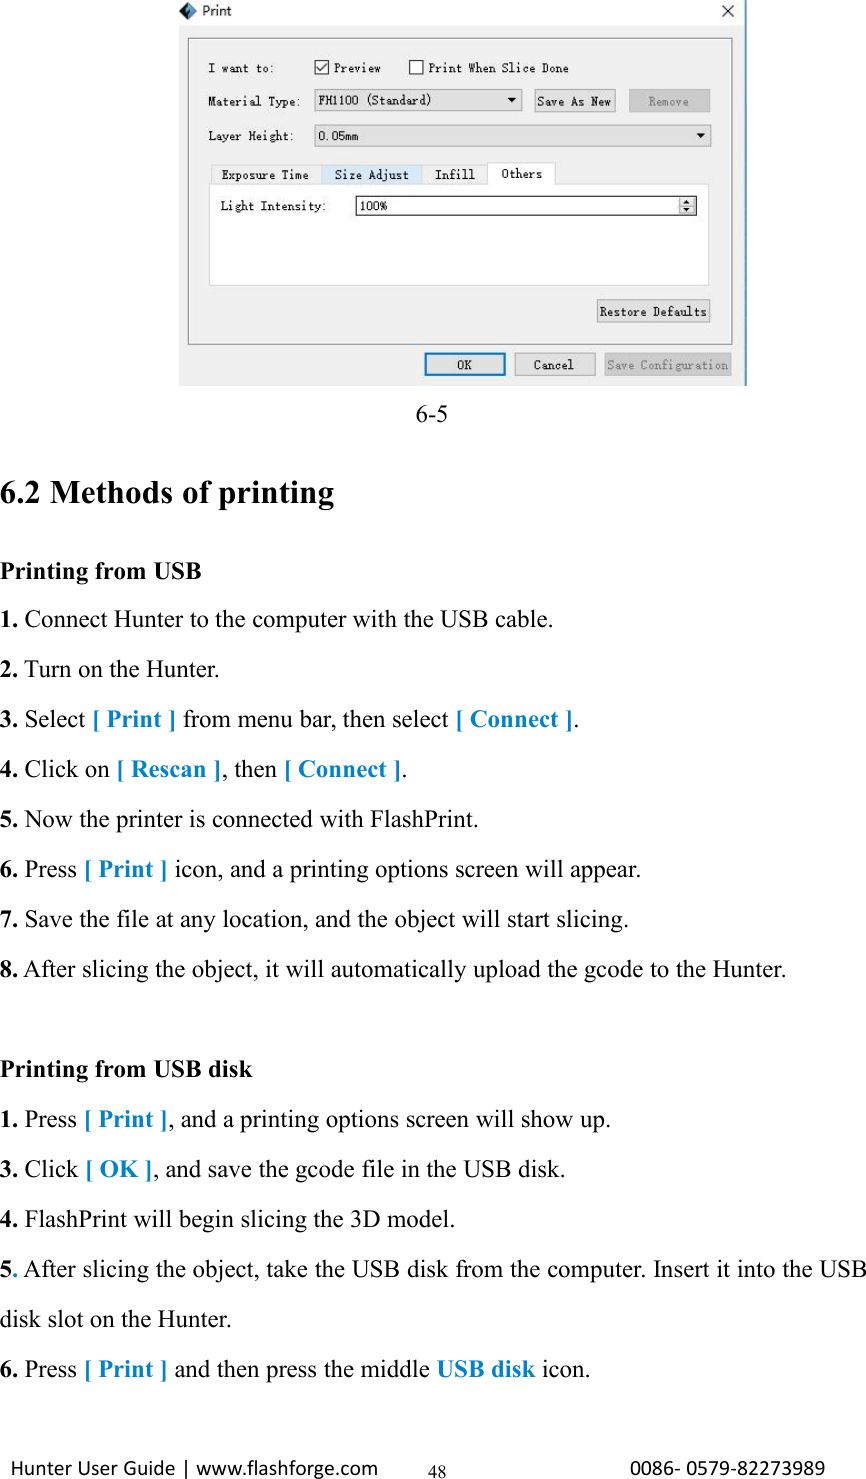 Hunter User Guide | www.flashforge.com 0086- 0579-82273989486-56.2 Methods of printingPrinting from USB1. Connect Hunter to the computer with the USB cable.2. Turn on the Hunter.3. Select [ Print ] from menu bar, then select [ Connect ].4. Click on [ Rescan ], then [ Connect ].5. Now the printer is connected with FlashPrint.6. Press [ Print ] icon, and a printing options screen will appear.7. Save the file at any location, and the object will start slicing.8. After slicing the object, it will automatically upload the gcode to the Hunter.Printing from USB disk1. Press [ Print ], and a printing options screen will show up.3. Click [ OK ], and save the gcode file in the USB disk.4. FlashPrint will begin slicing the 3D model.5.After slicing the object, take the USB disk from the computer. Insert it into the USBdisk slot on the Hunter.6. Press [ Print ] and then press the middle USB disk icon.